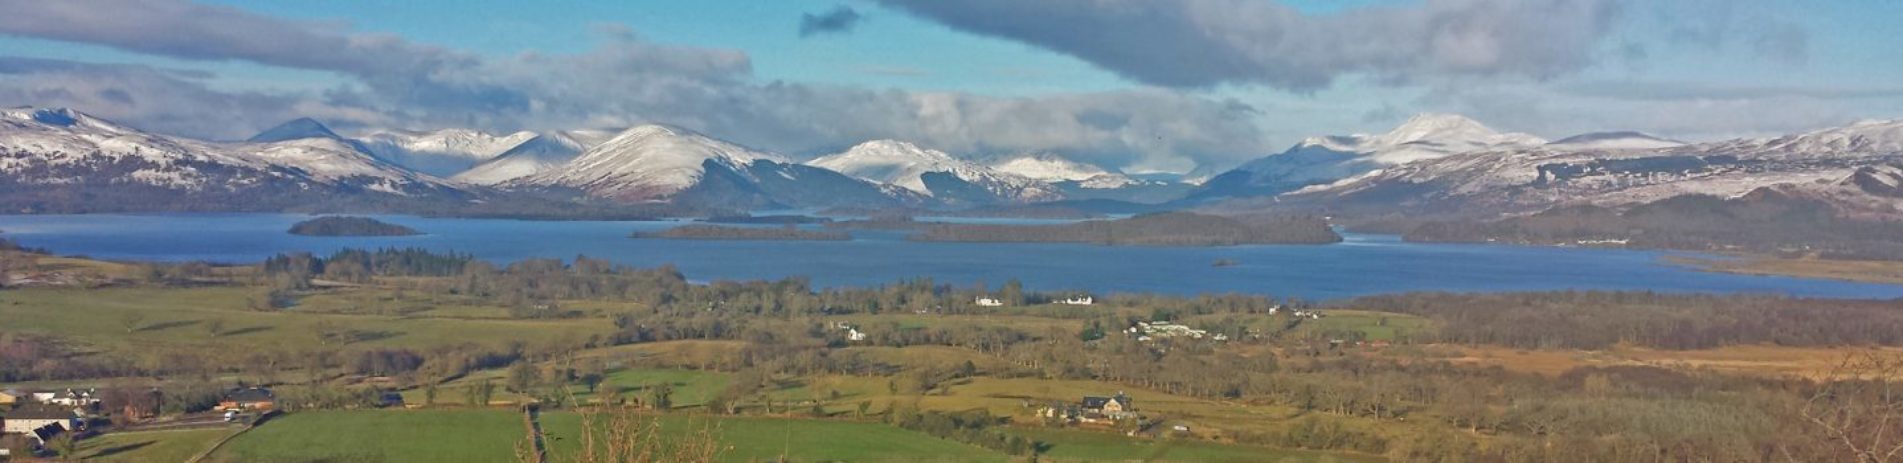 panorama-of-loch-lomond-islands-and-surrounding-hills-covered-by-snow-with-gartocharn-village-and-farmland-in-foreground-seen-from-dumpling-hill